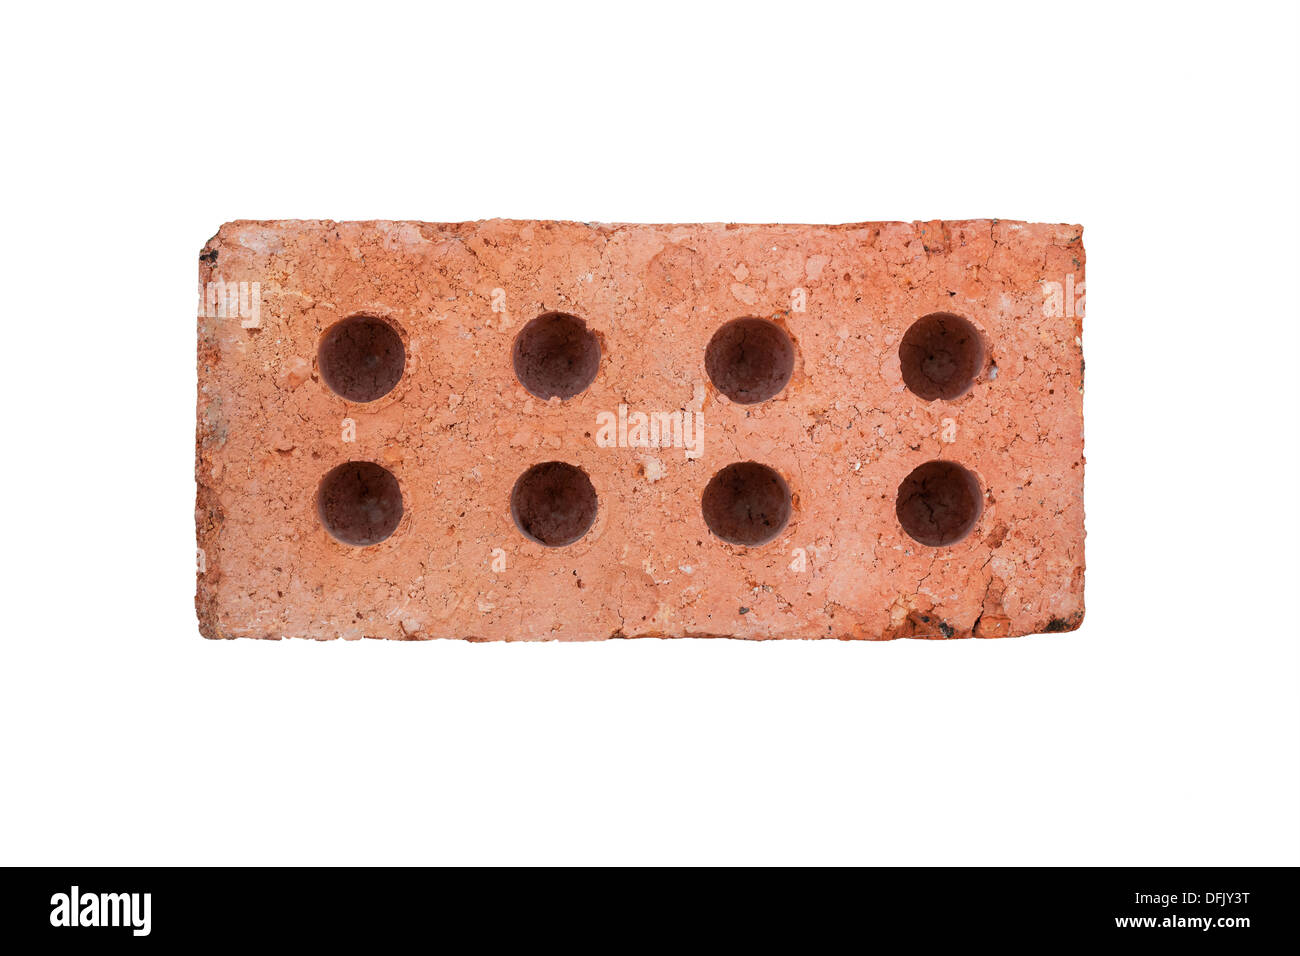 Front view of red brick isolated on white background Stock Photo